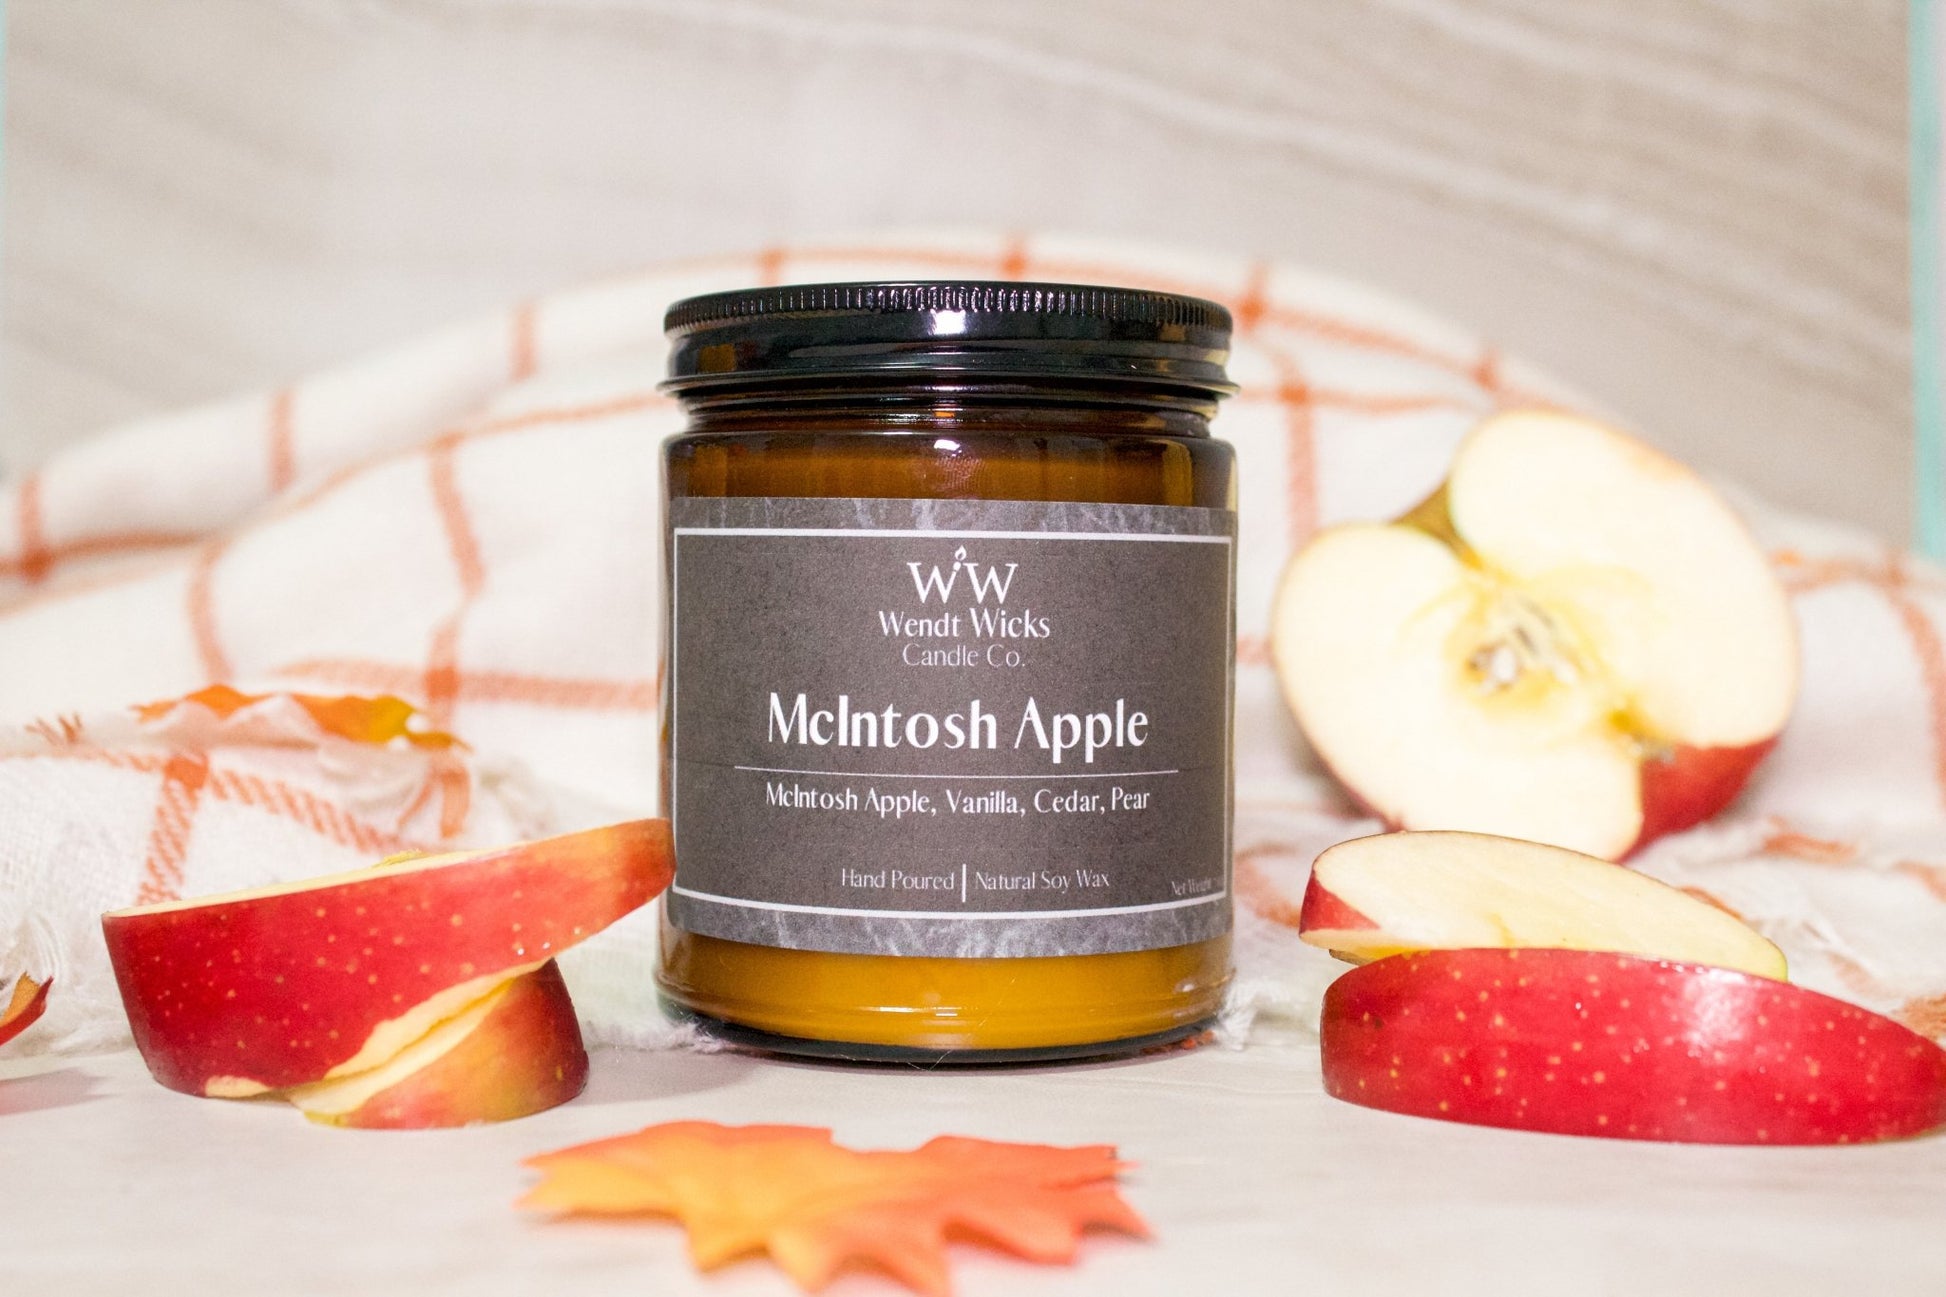 McIntosh Apple - Wendt Wicks Candle Co. - Amber candle